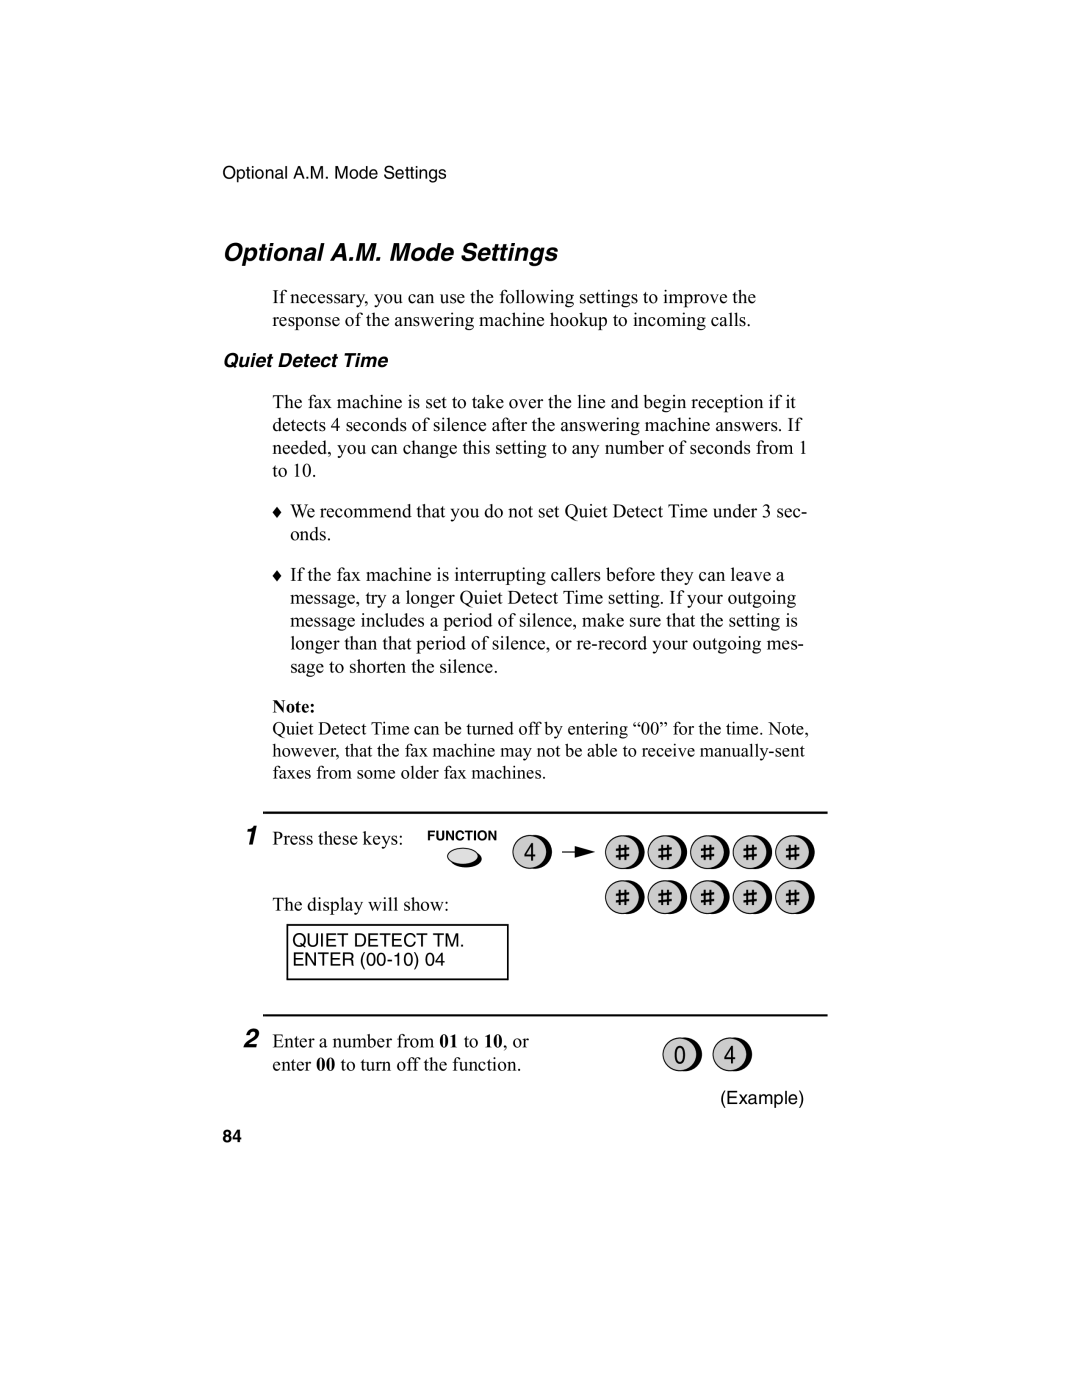 Sharp FO-2970M operation manual Optional A.M. Mode Settings, Quiet Detect Time 